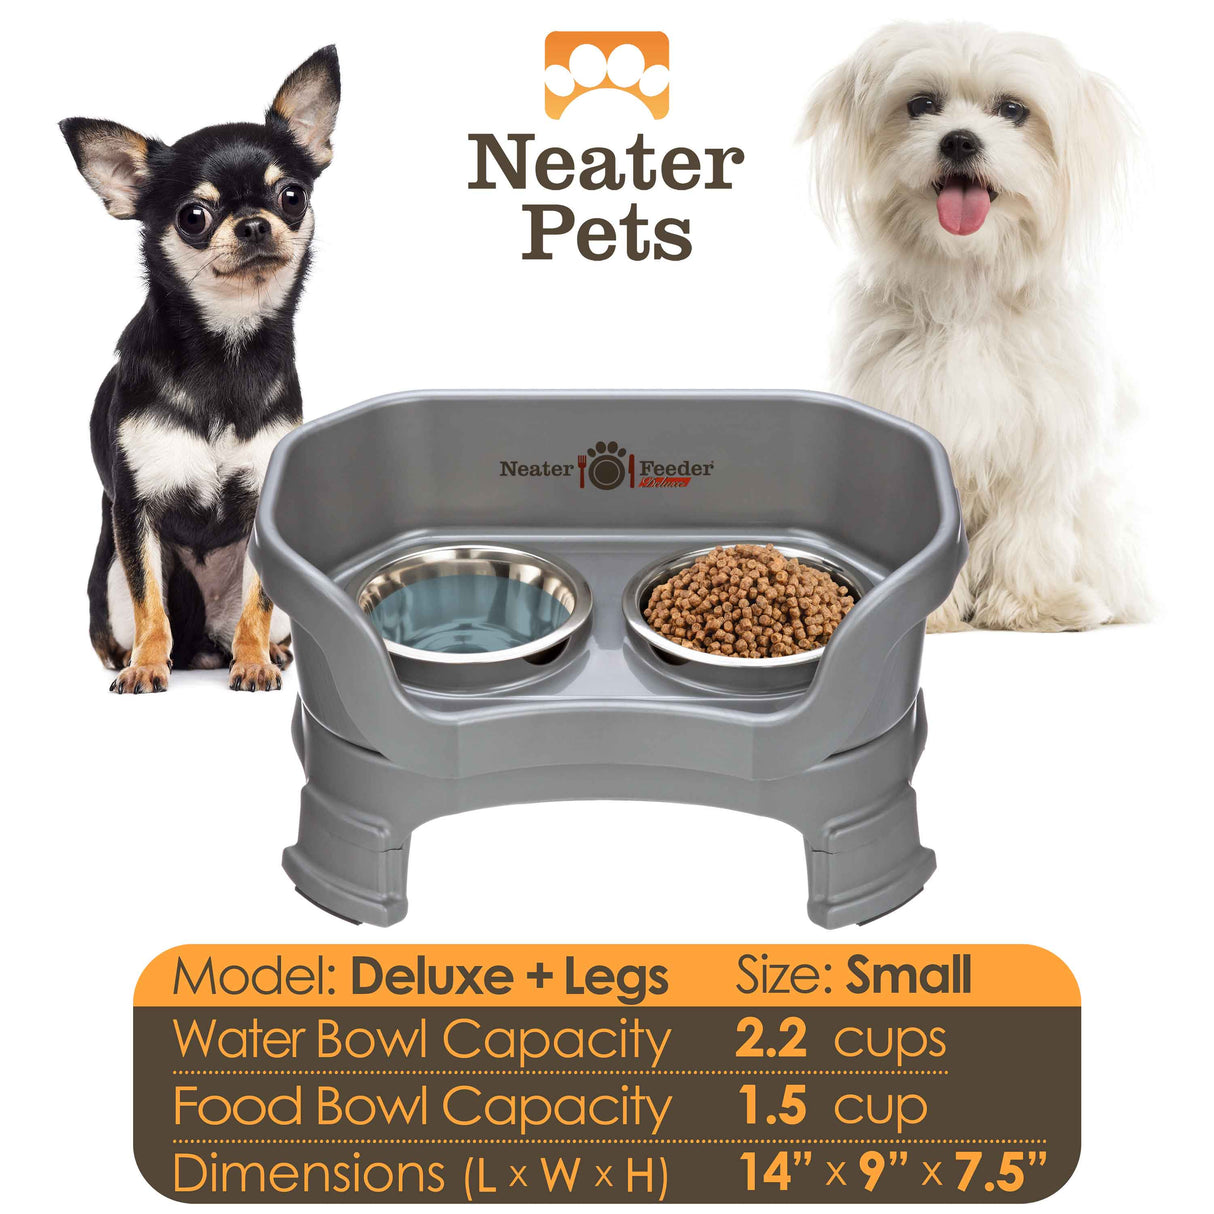 Neater Pets Neater Feeder Deluxe Mess-Proof Elevated Food & Water